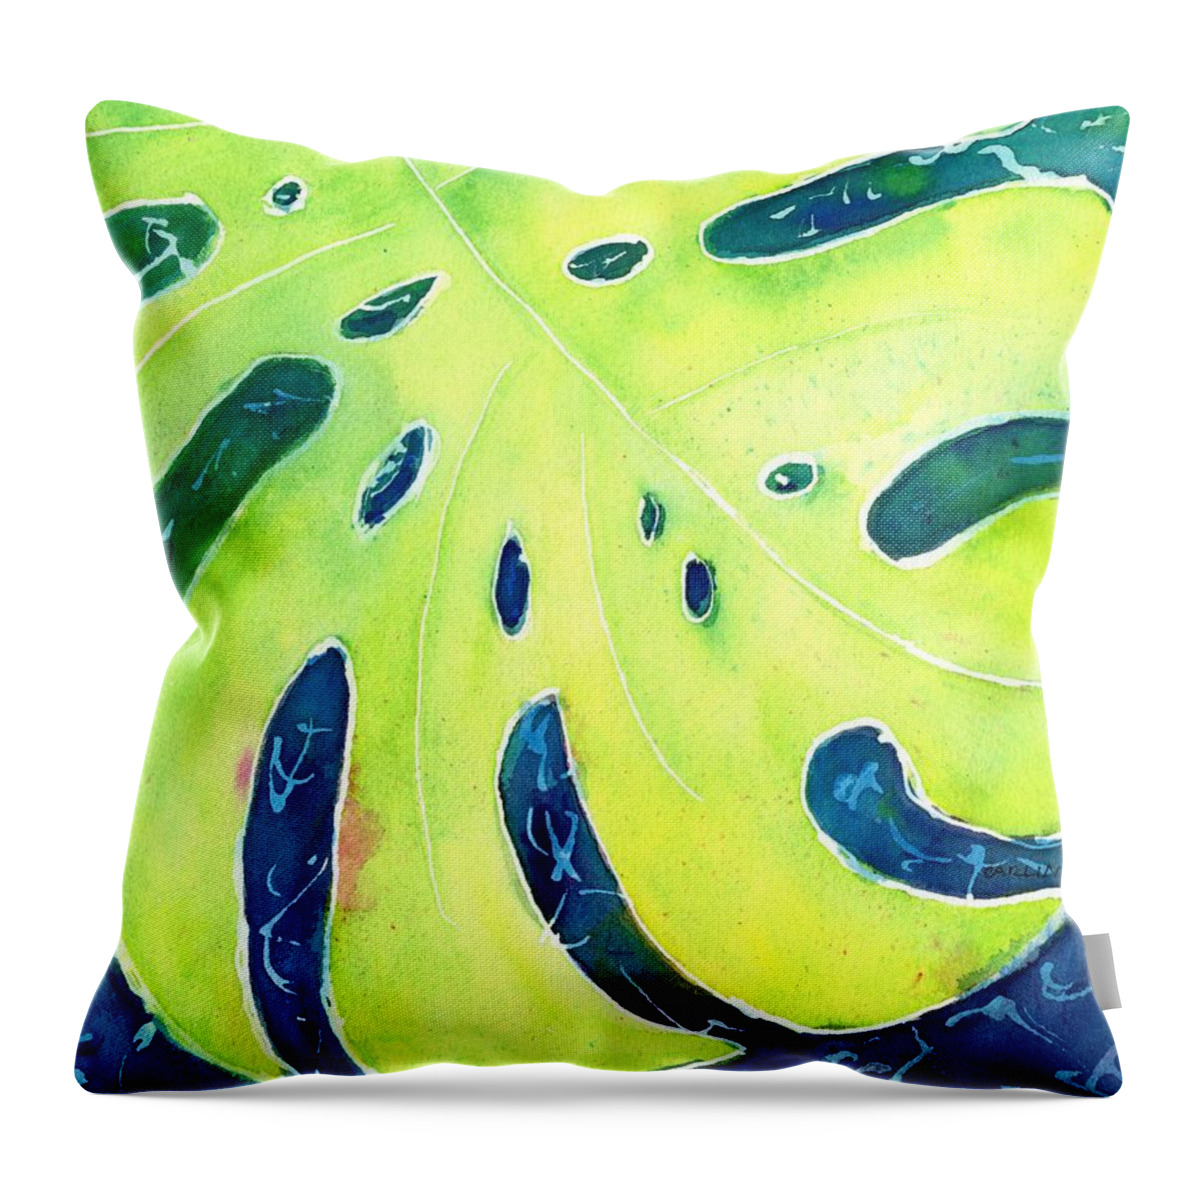 Monstera Throw Pillow featuring the painting Monstera Tropical Leaves 4 by Carlin Blahnik CarlinArtWatercolor